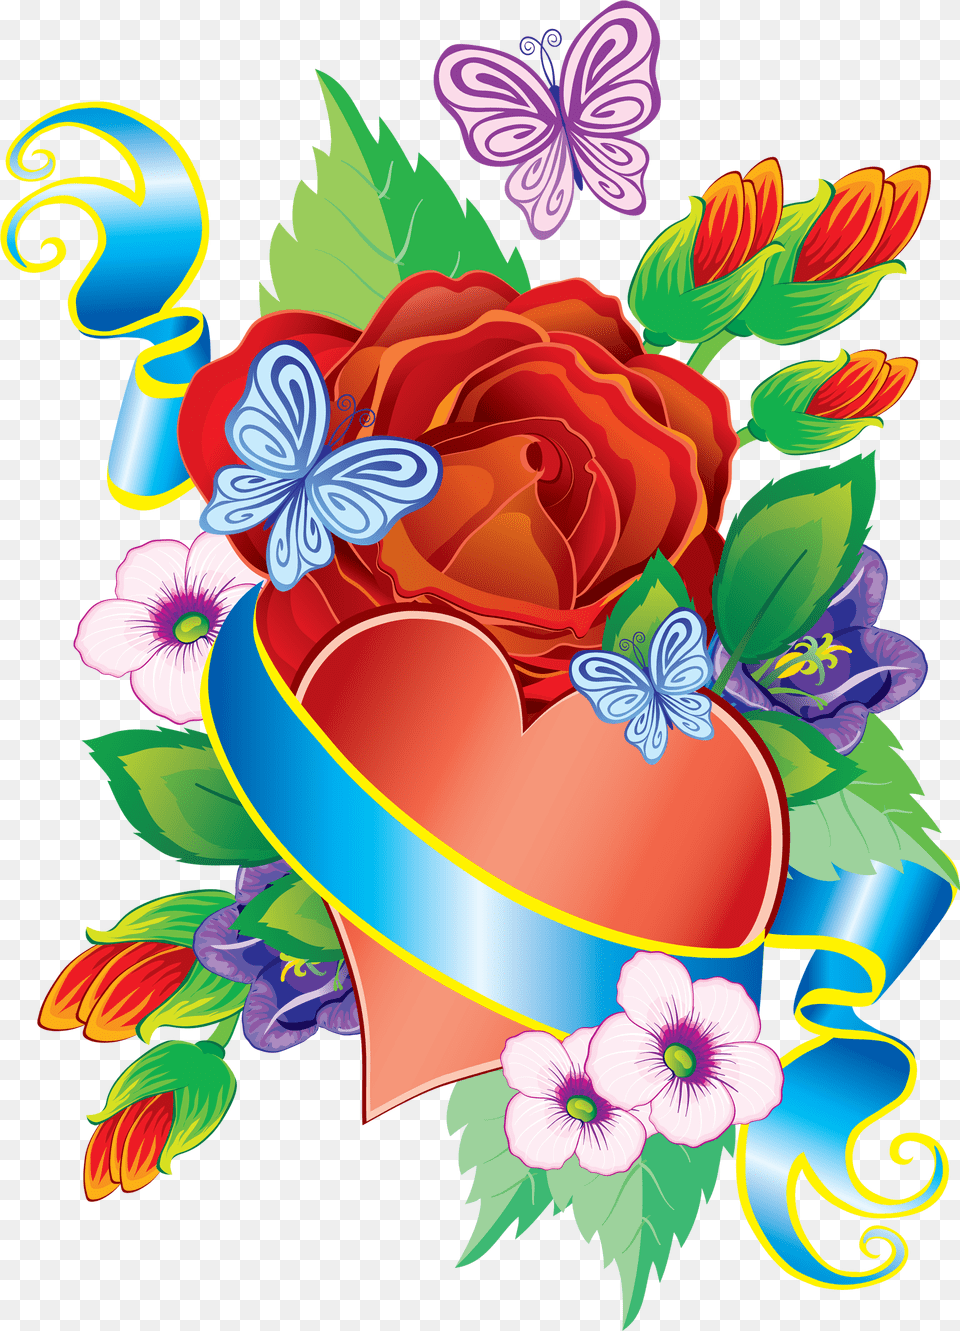 Heart And Flowers Decorative Element Decorative Flowers And Hearts, Art, Rose, Plant, Pattern Png Image